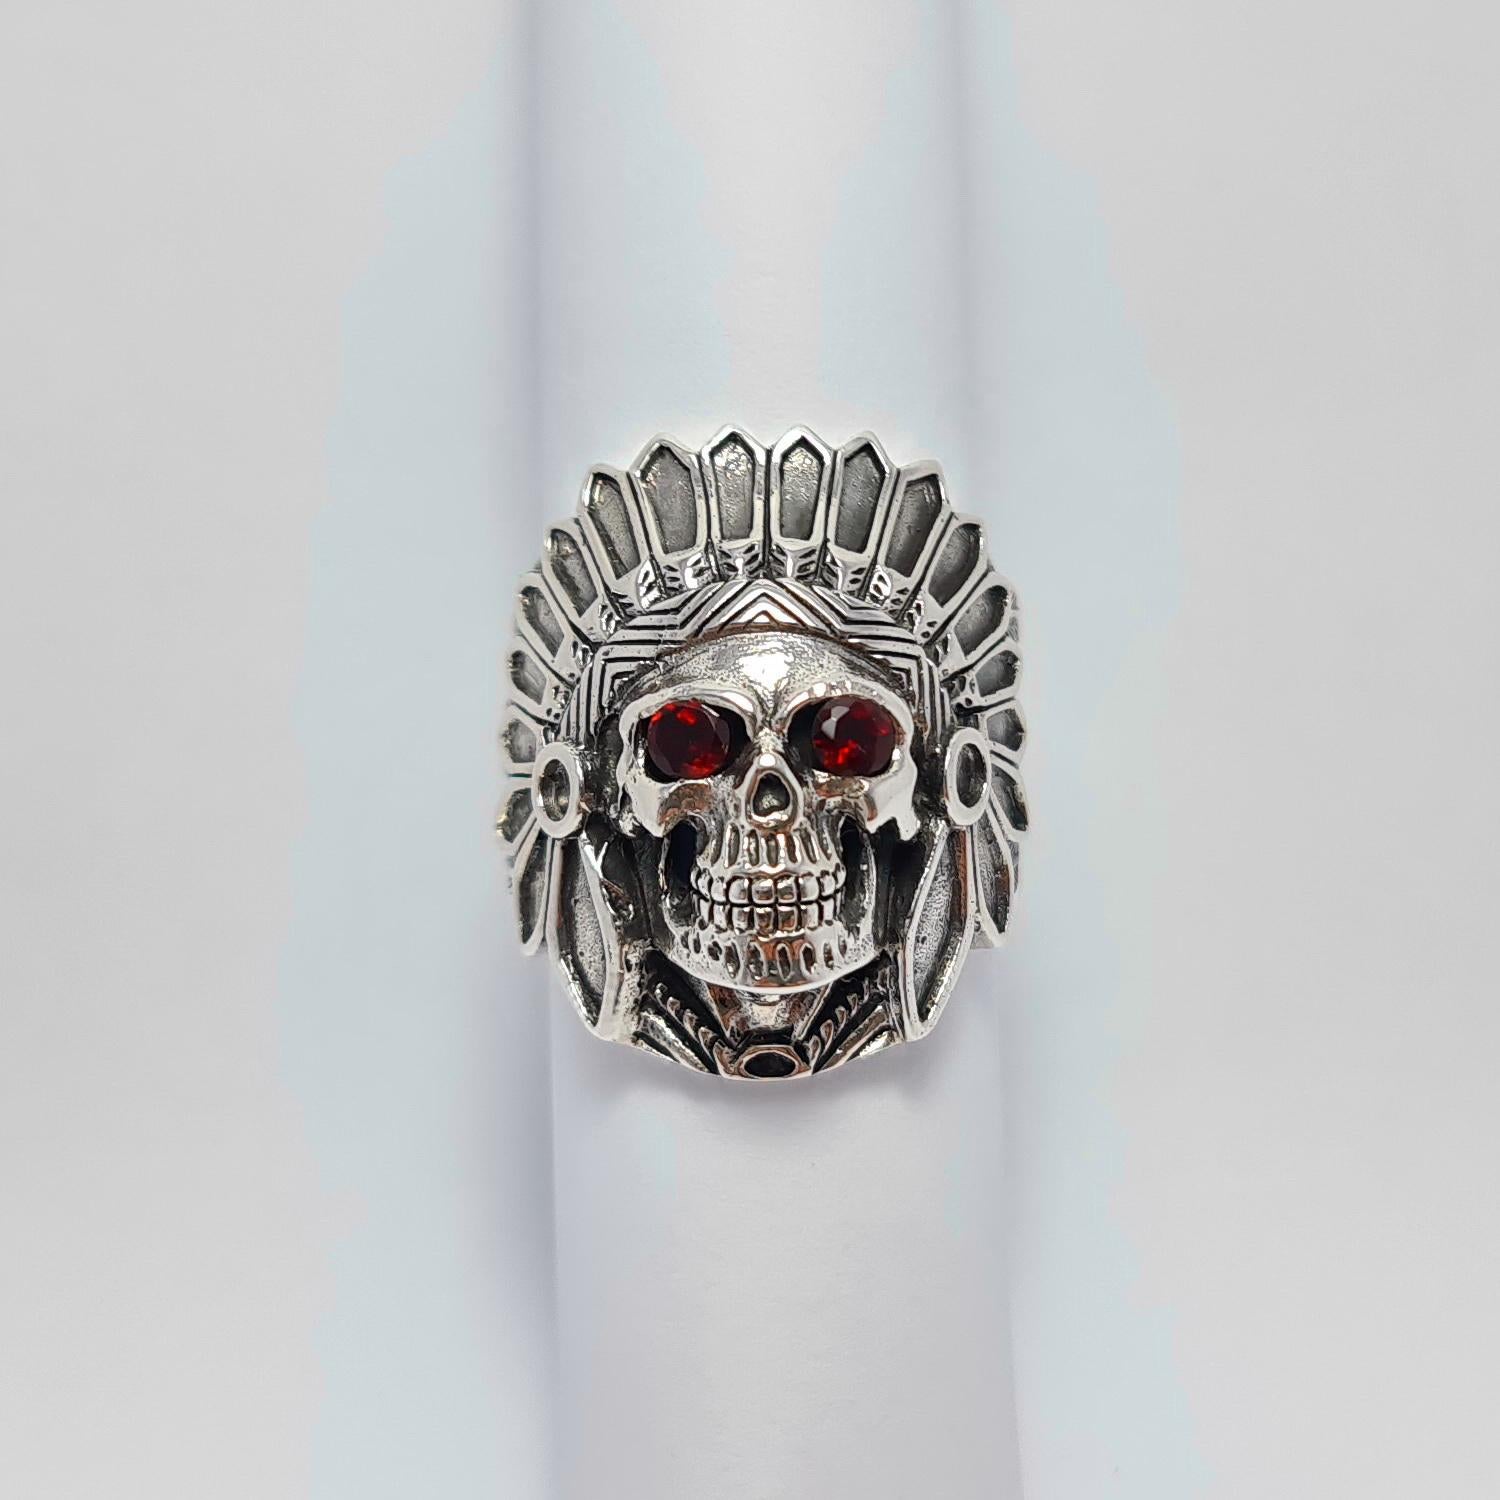 Garnet Eyes American Indian Skull Tribal Chief Warrior Ring Sterling Silver 925 For Sale 8